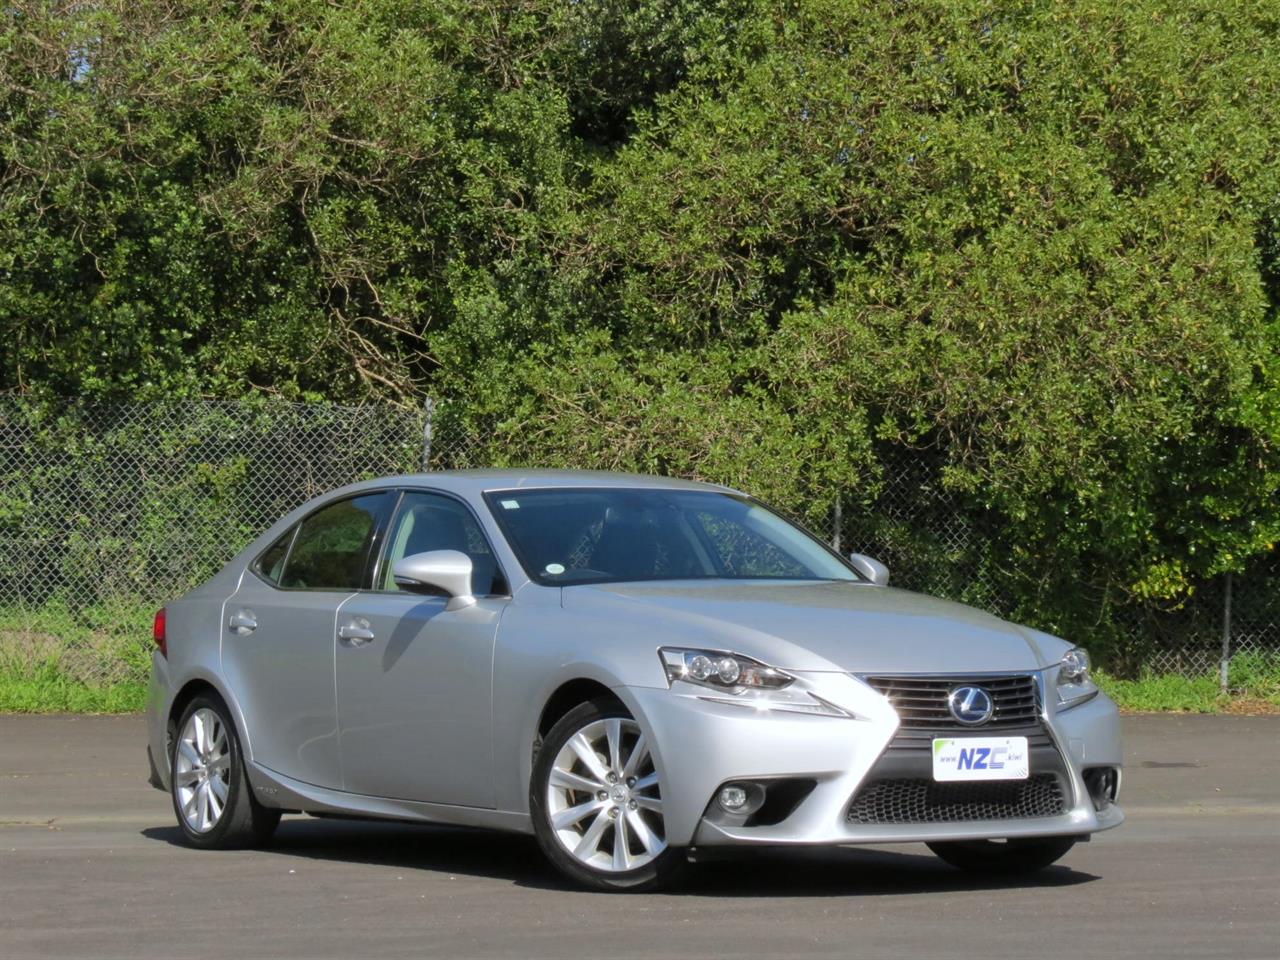 NZC 2016 Lexus IS 300h just arrived to Auckland